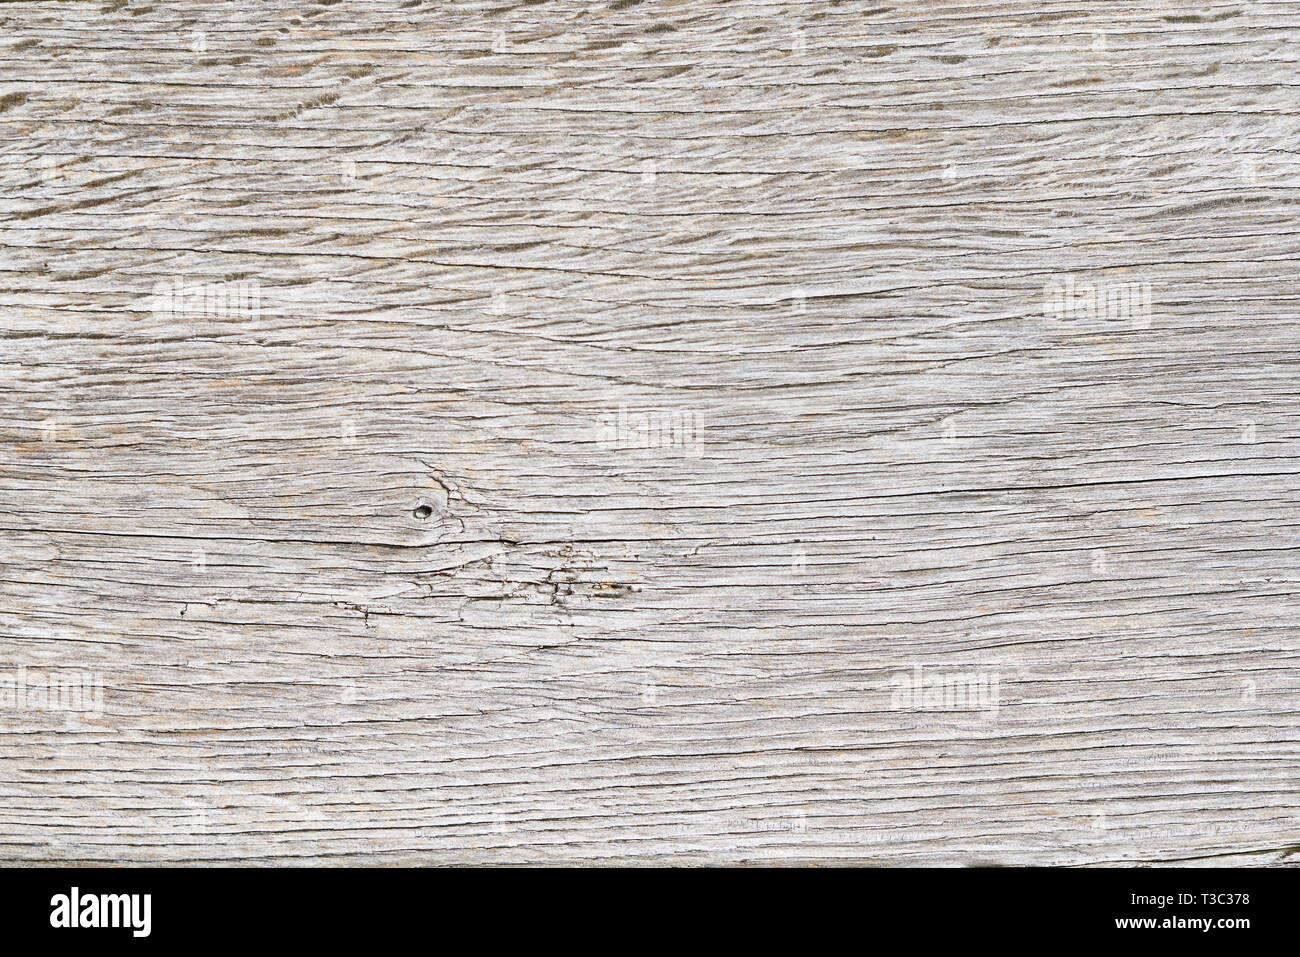 Old white oak wood for background or old grey wooden texture. Old oak for vintage table or furniture texture. Surface eroded by time. More than a hund Stock Photo